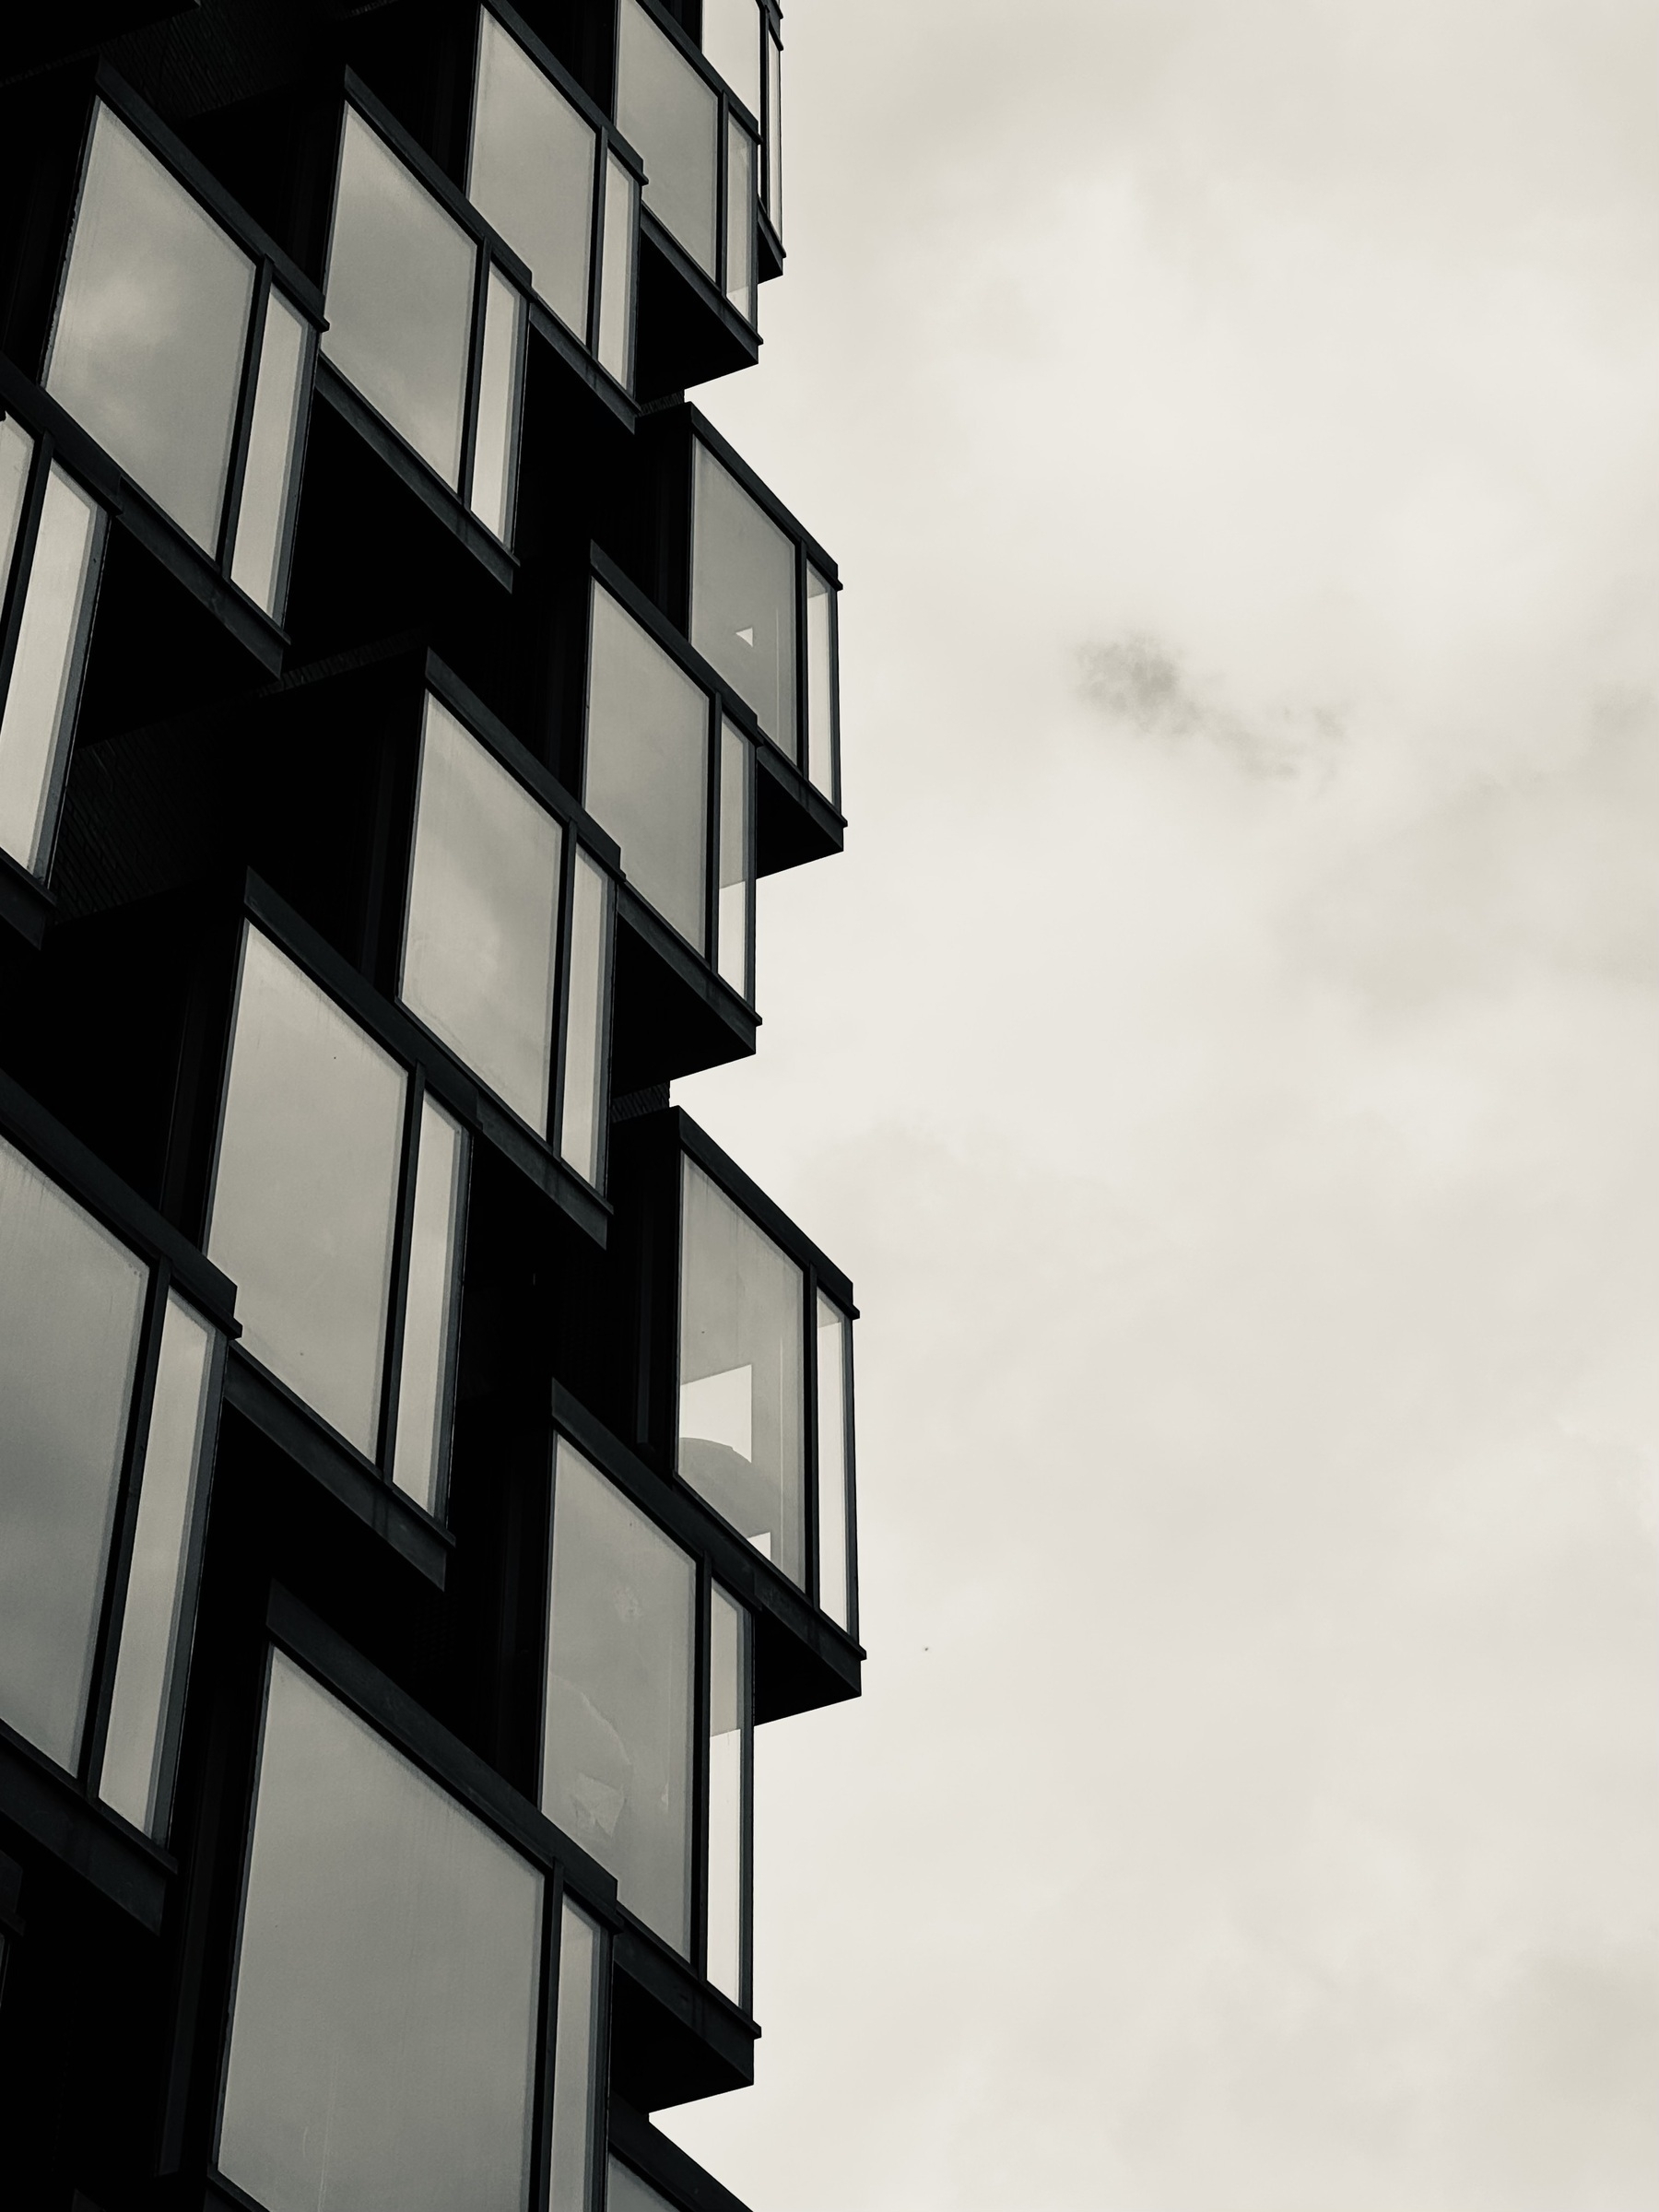 Boxy windows sticking out from a building against a cloudy sky.